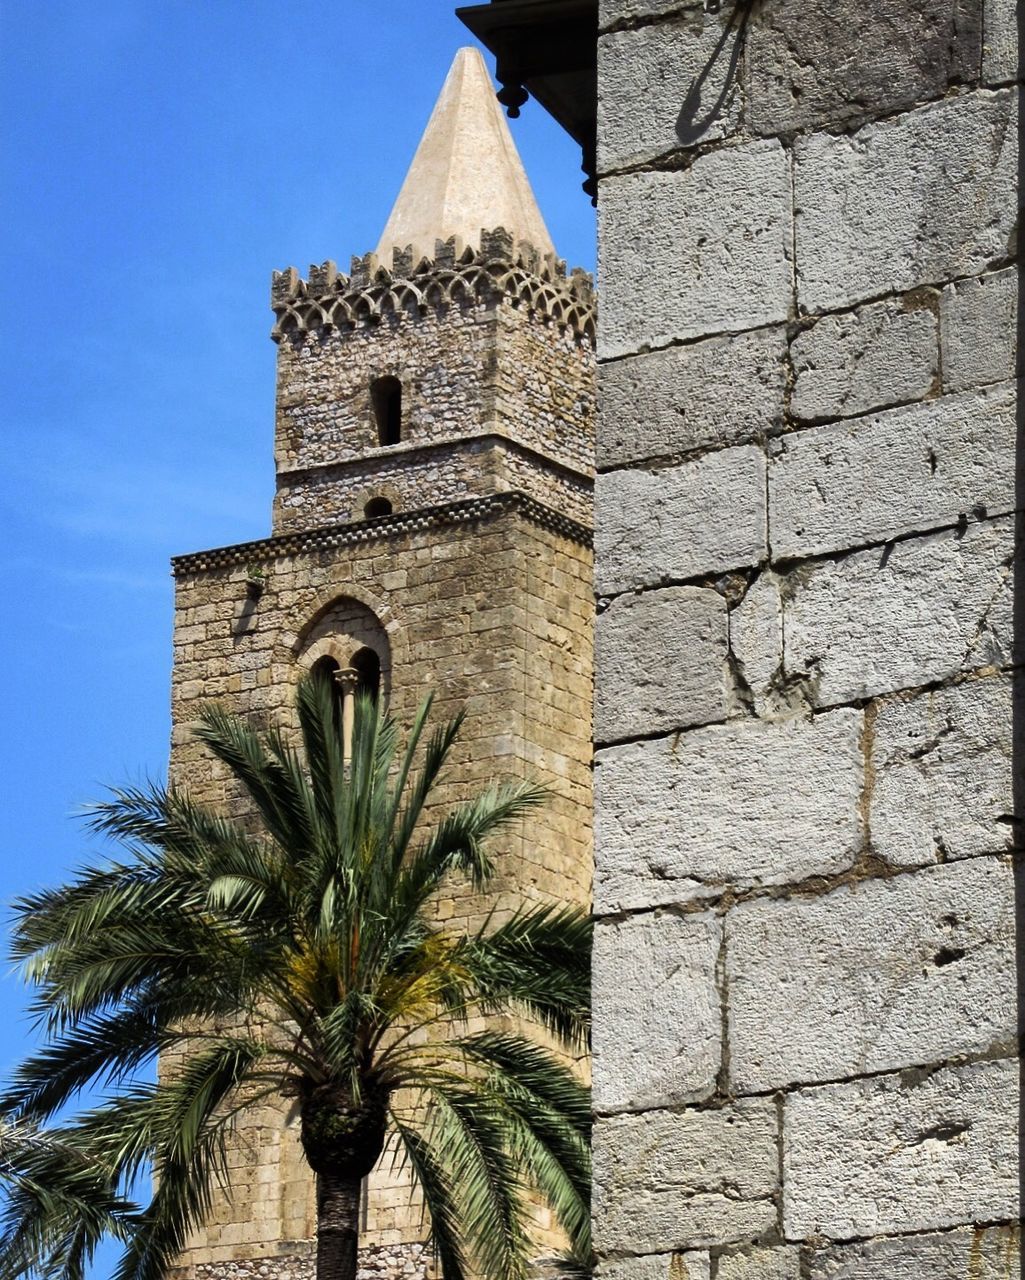 architecture, built structure, building exterior, tree, plant, the past, no people, low angle view, palm tree, history, building, sky, nature, tower, tropical climate, religion, day, spirituality, wall, belief, outdoors, stone wall